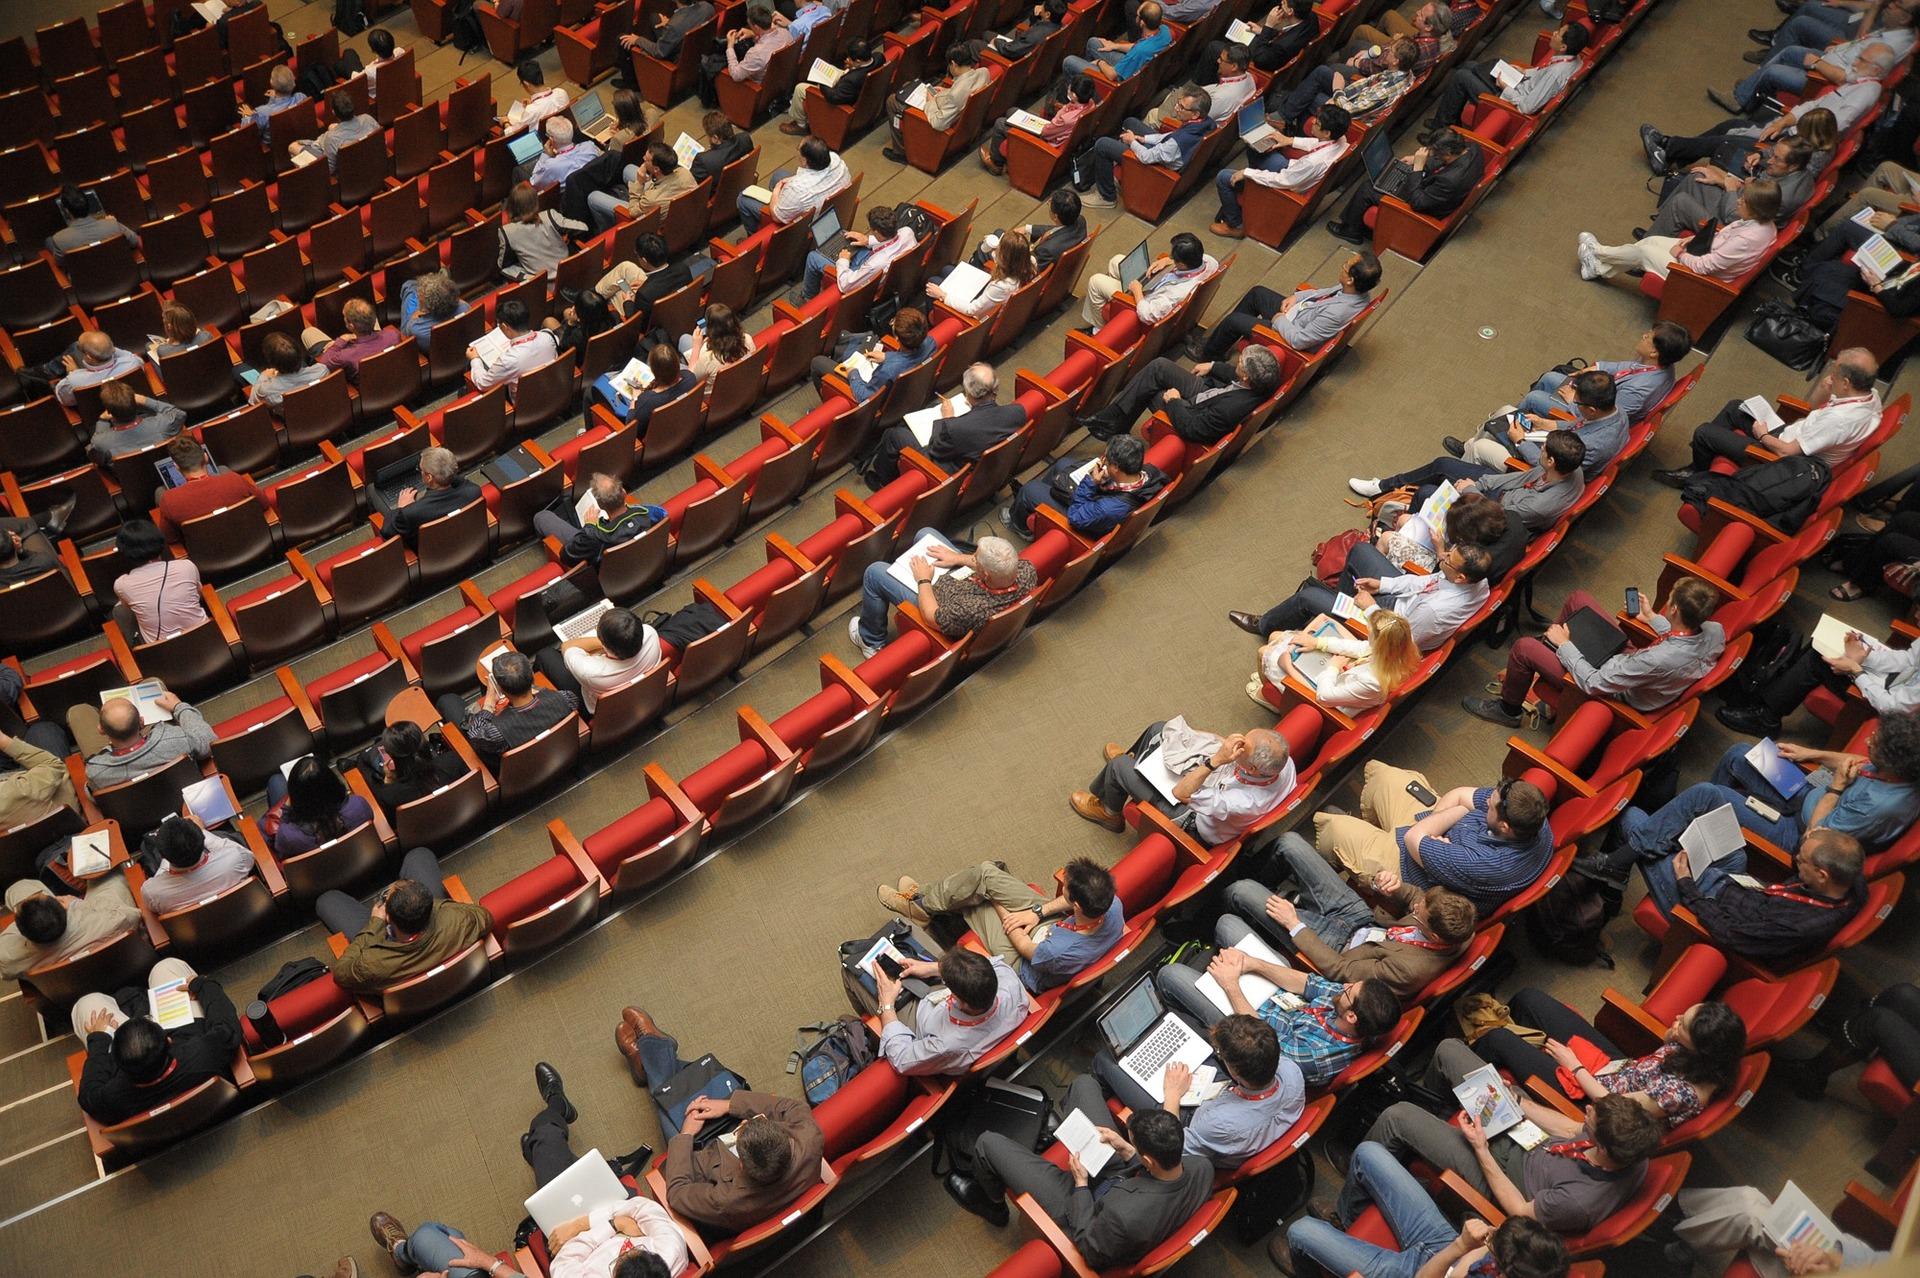 Ariel view of people sitting in an auditorium